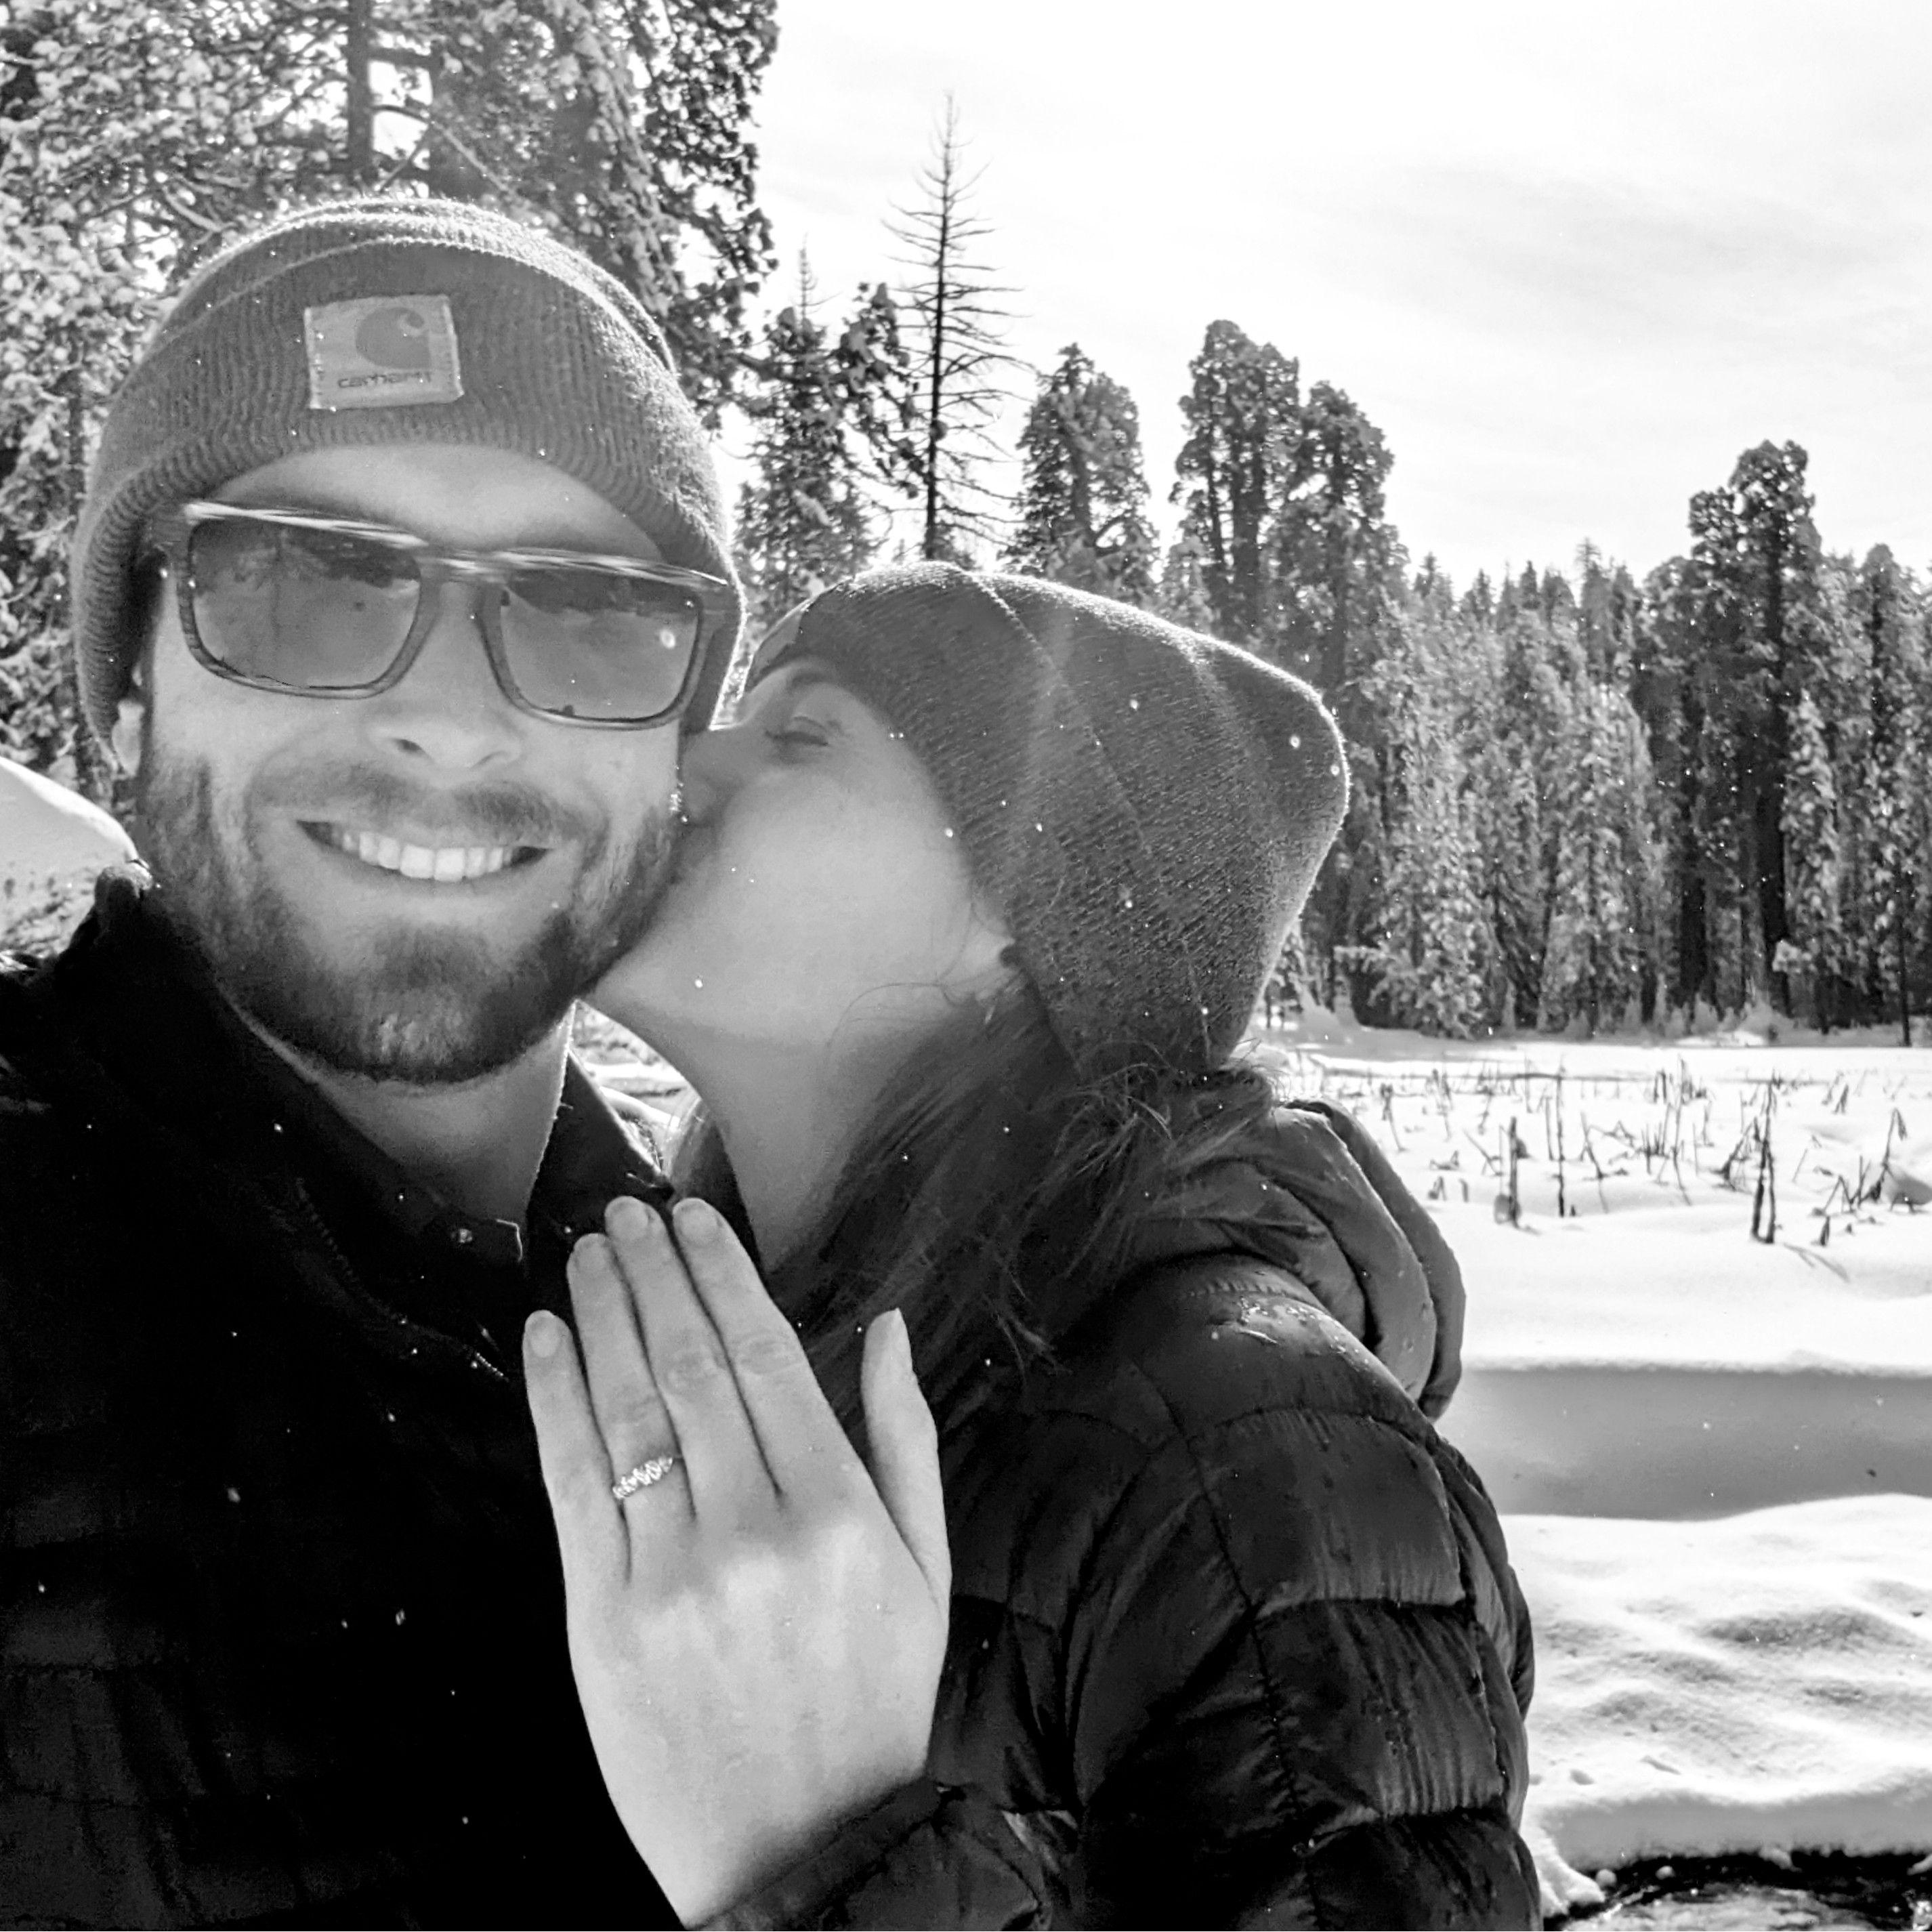 01/03/2023 The day we got engaged in Sequoia National Park <3